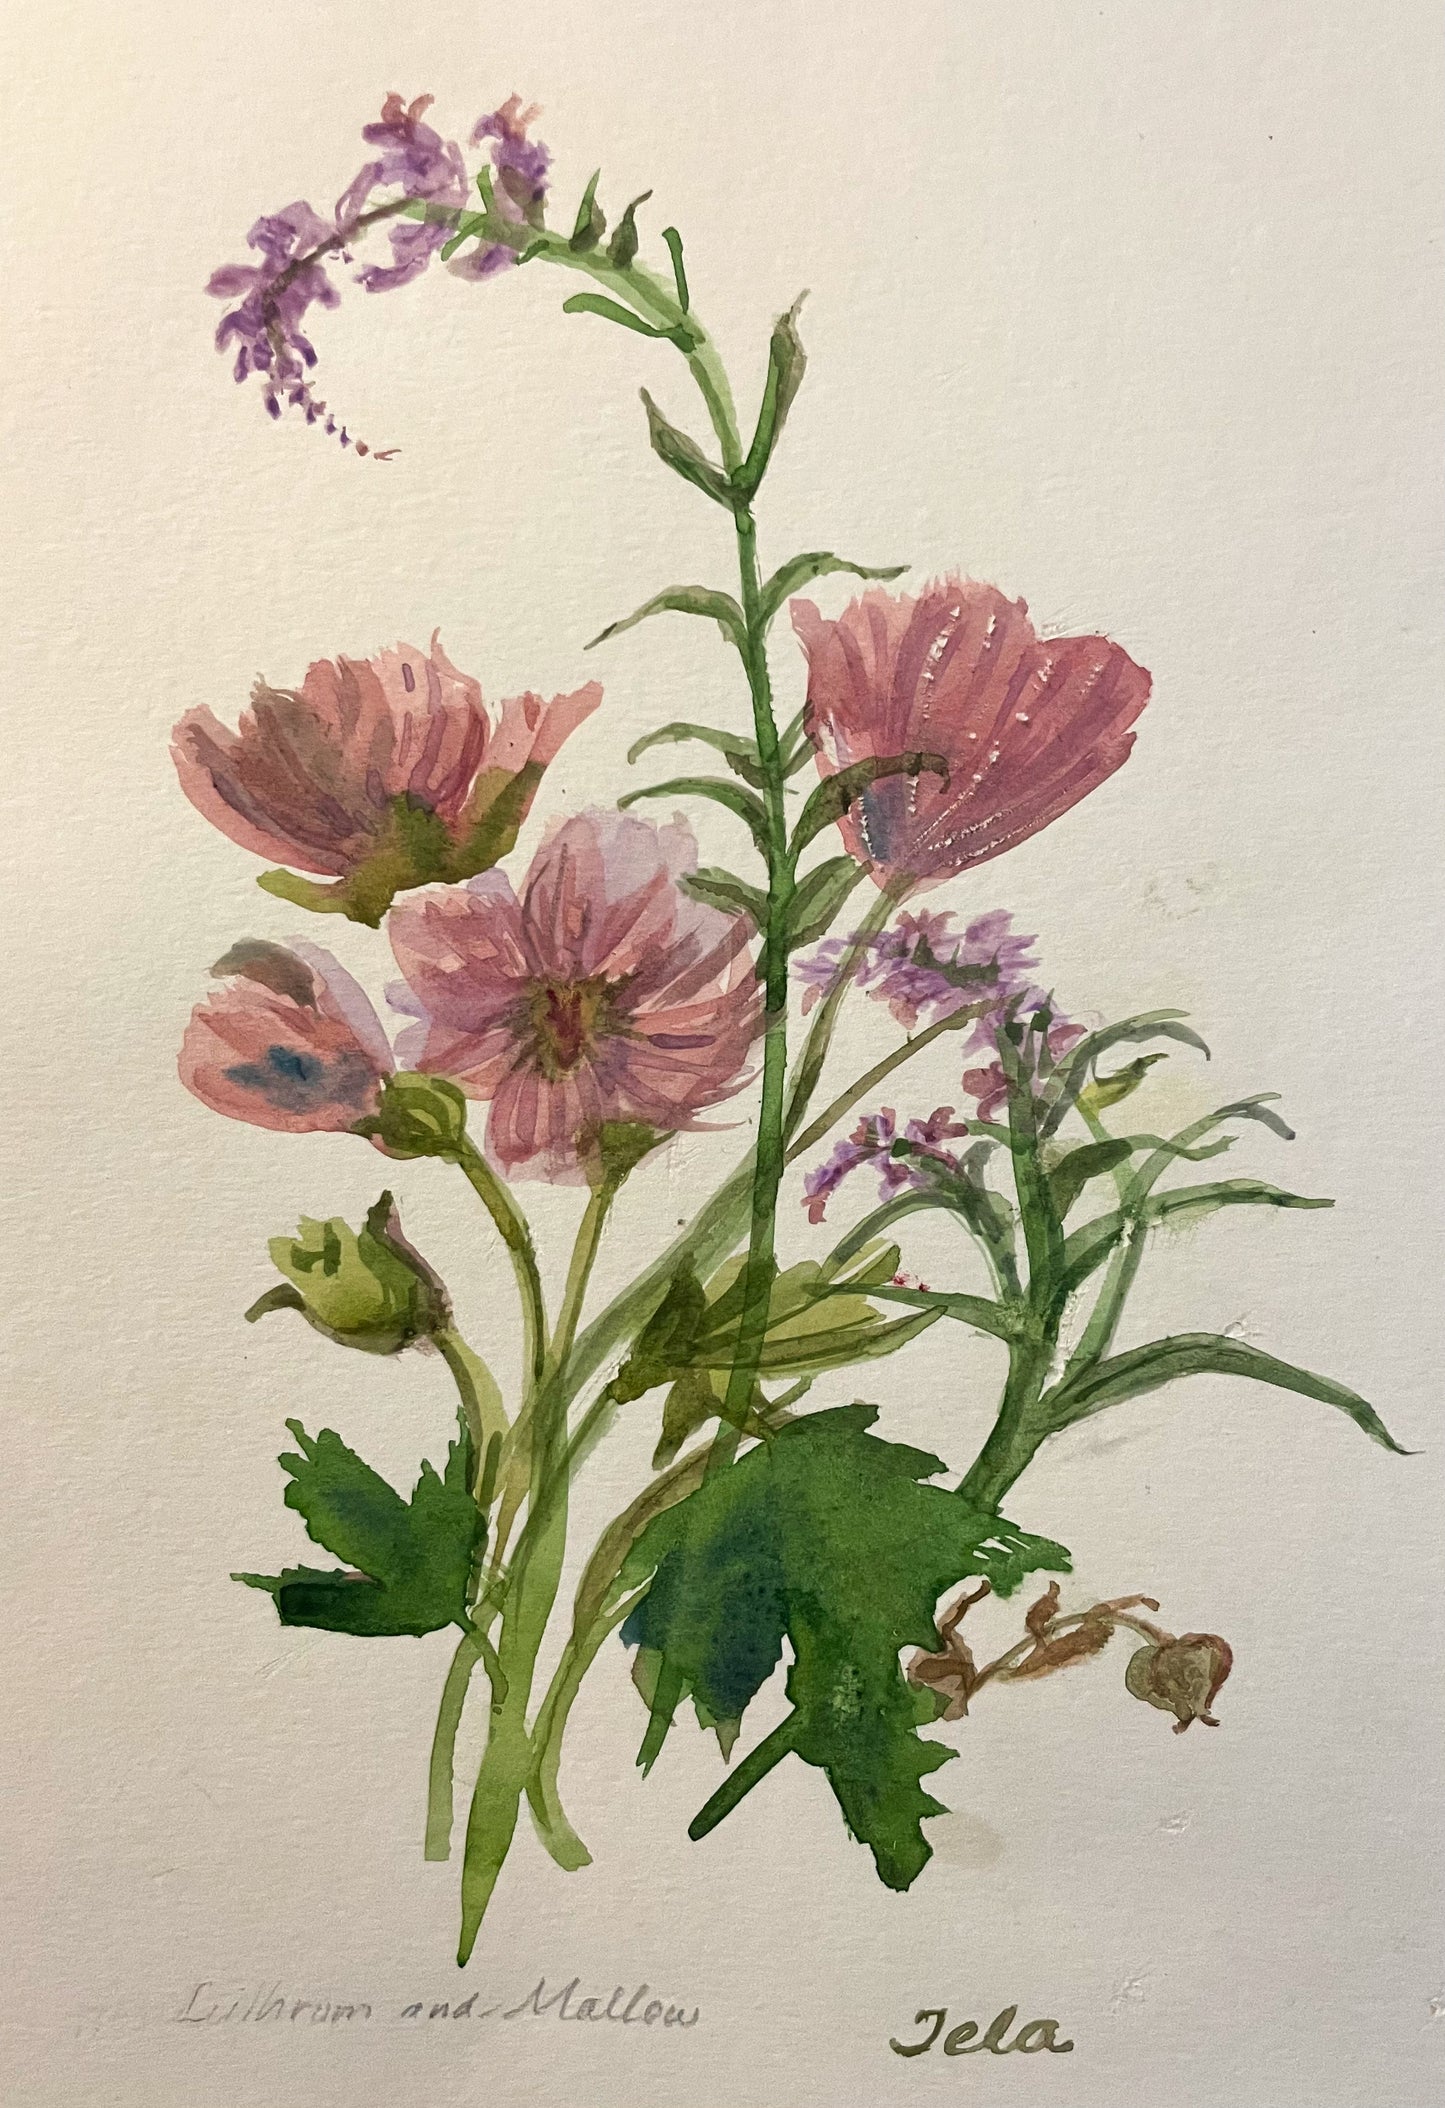 "Lythrum and Mallow", Original Watercolour by Tela